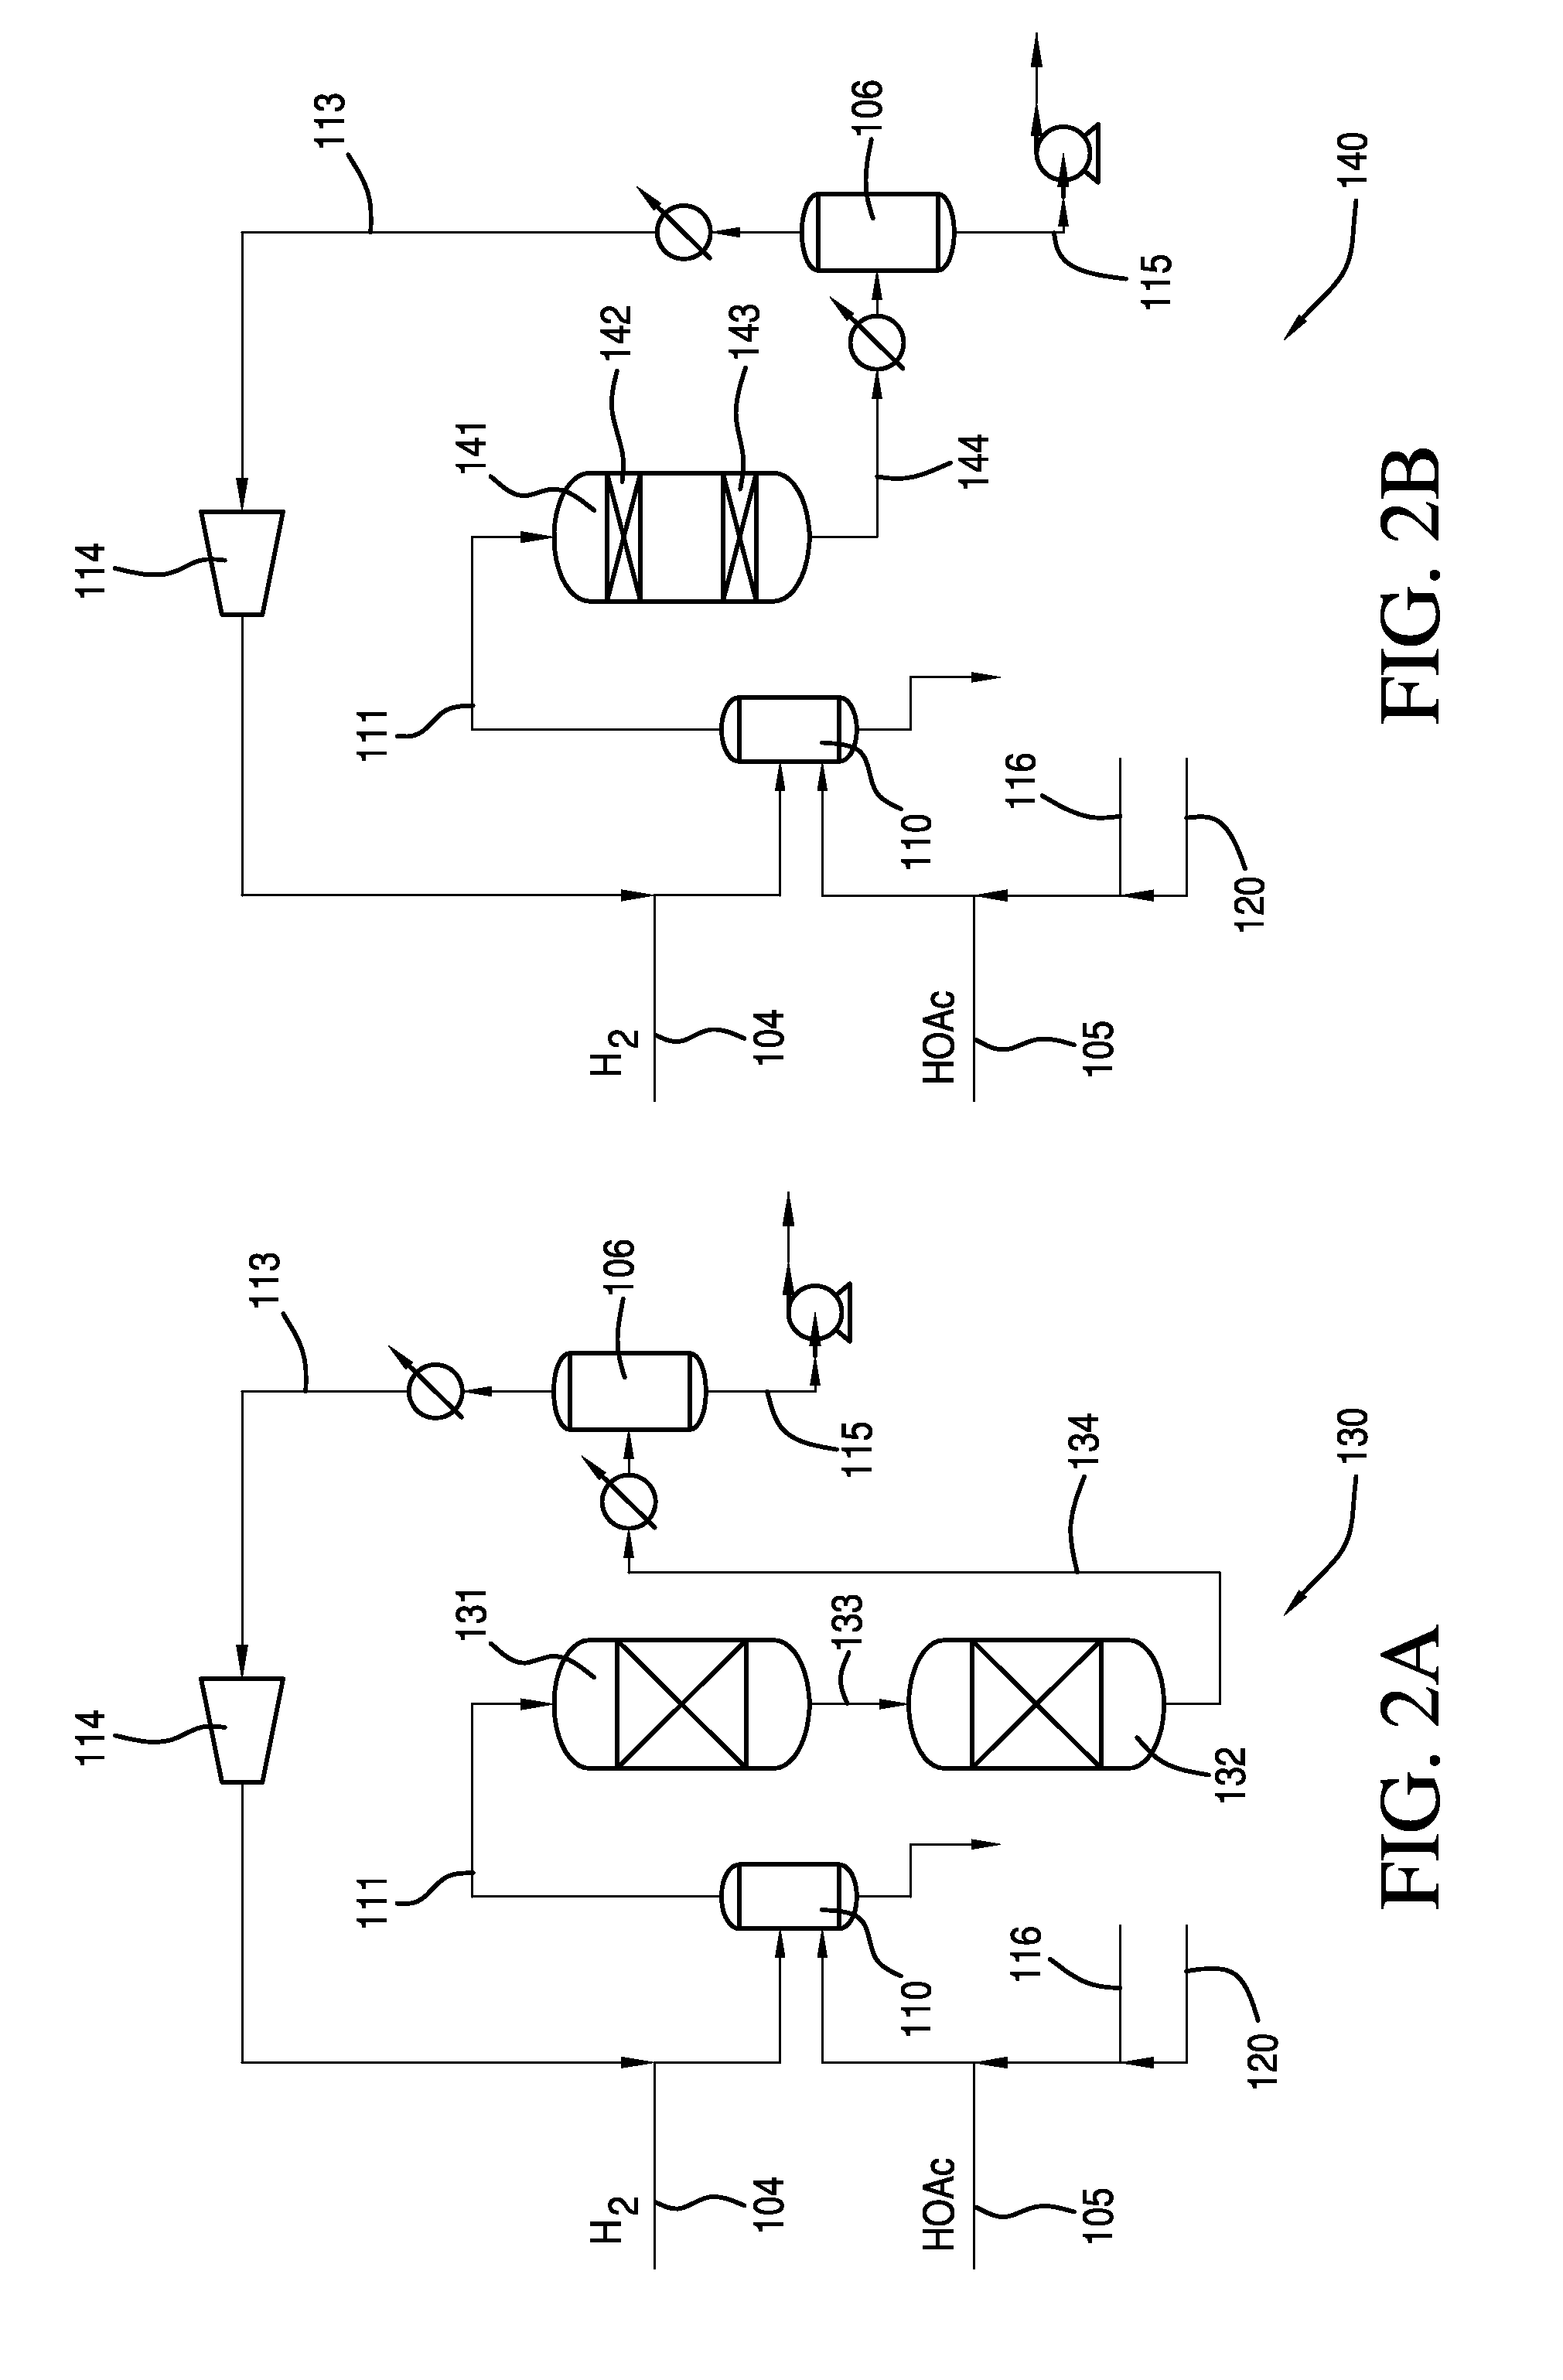 Process for Making Ethanol From Acetic Acid Using Acidic Catalysts